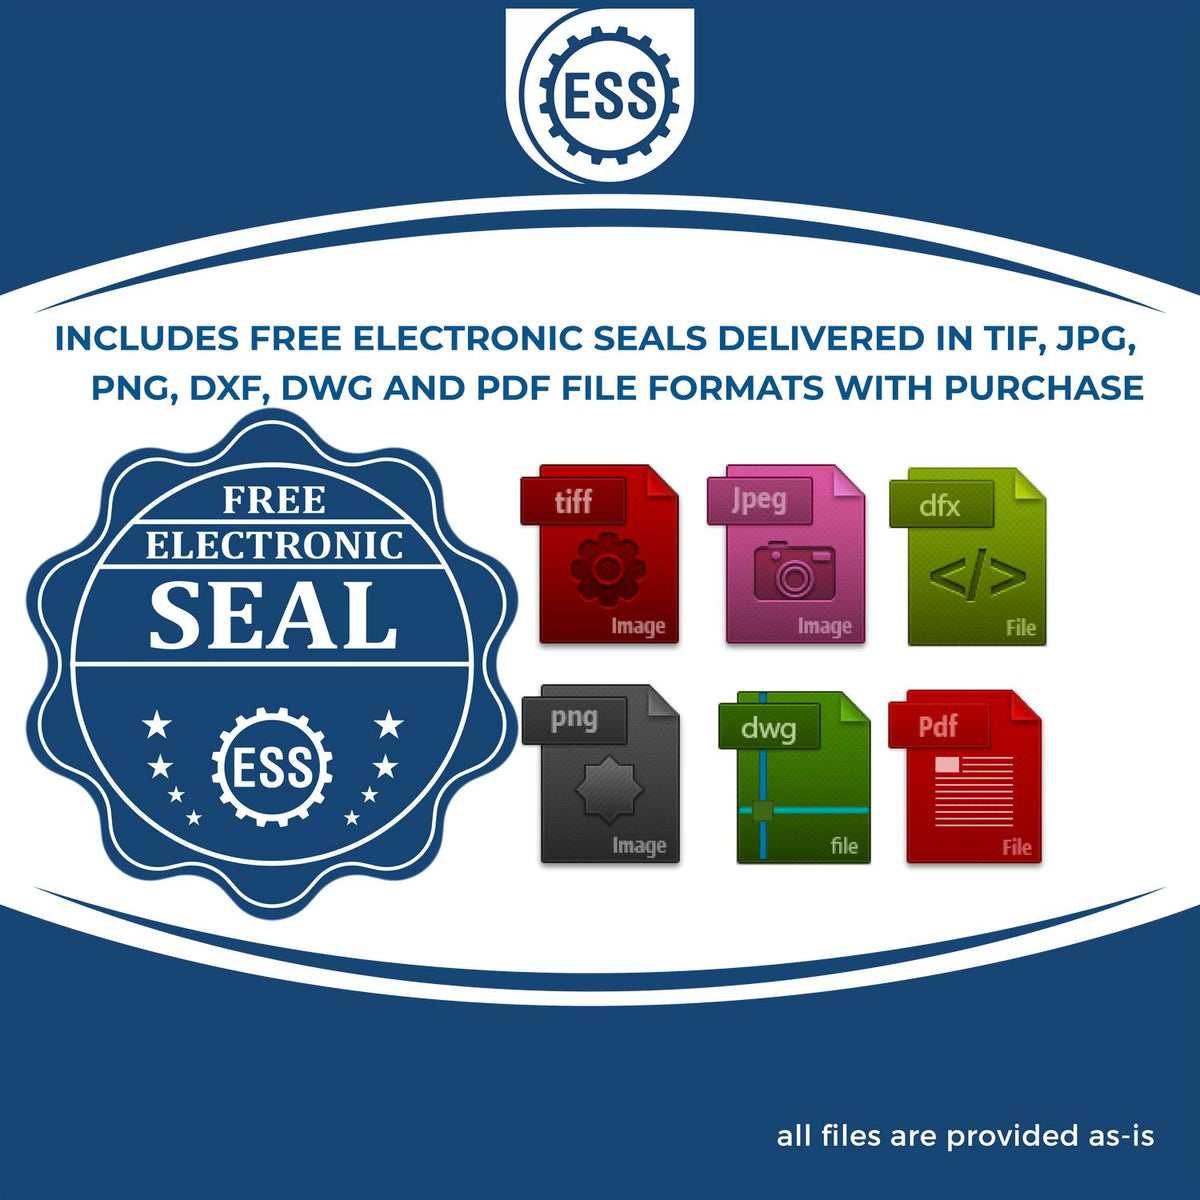 An infographic for the free electronic seal for the Soft Vermont Professional Geologist Seal illustrating the different file type icons such as DXF, DWG, TIF, JPG and PNG.